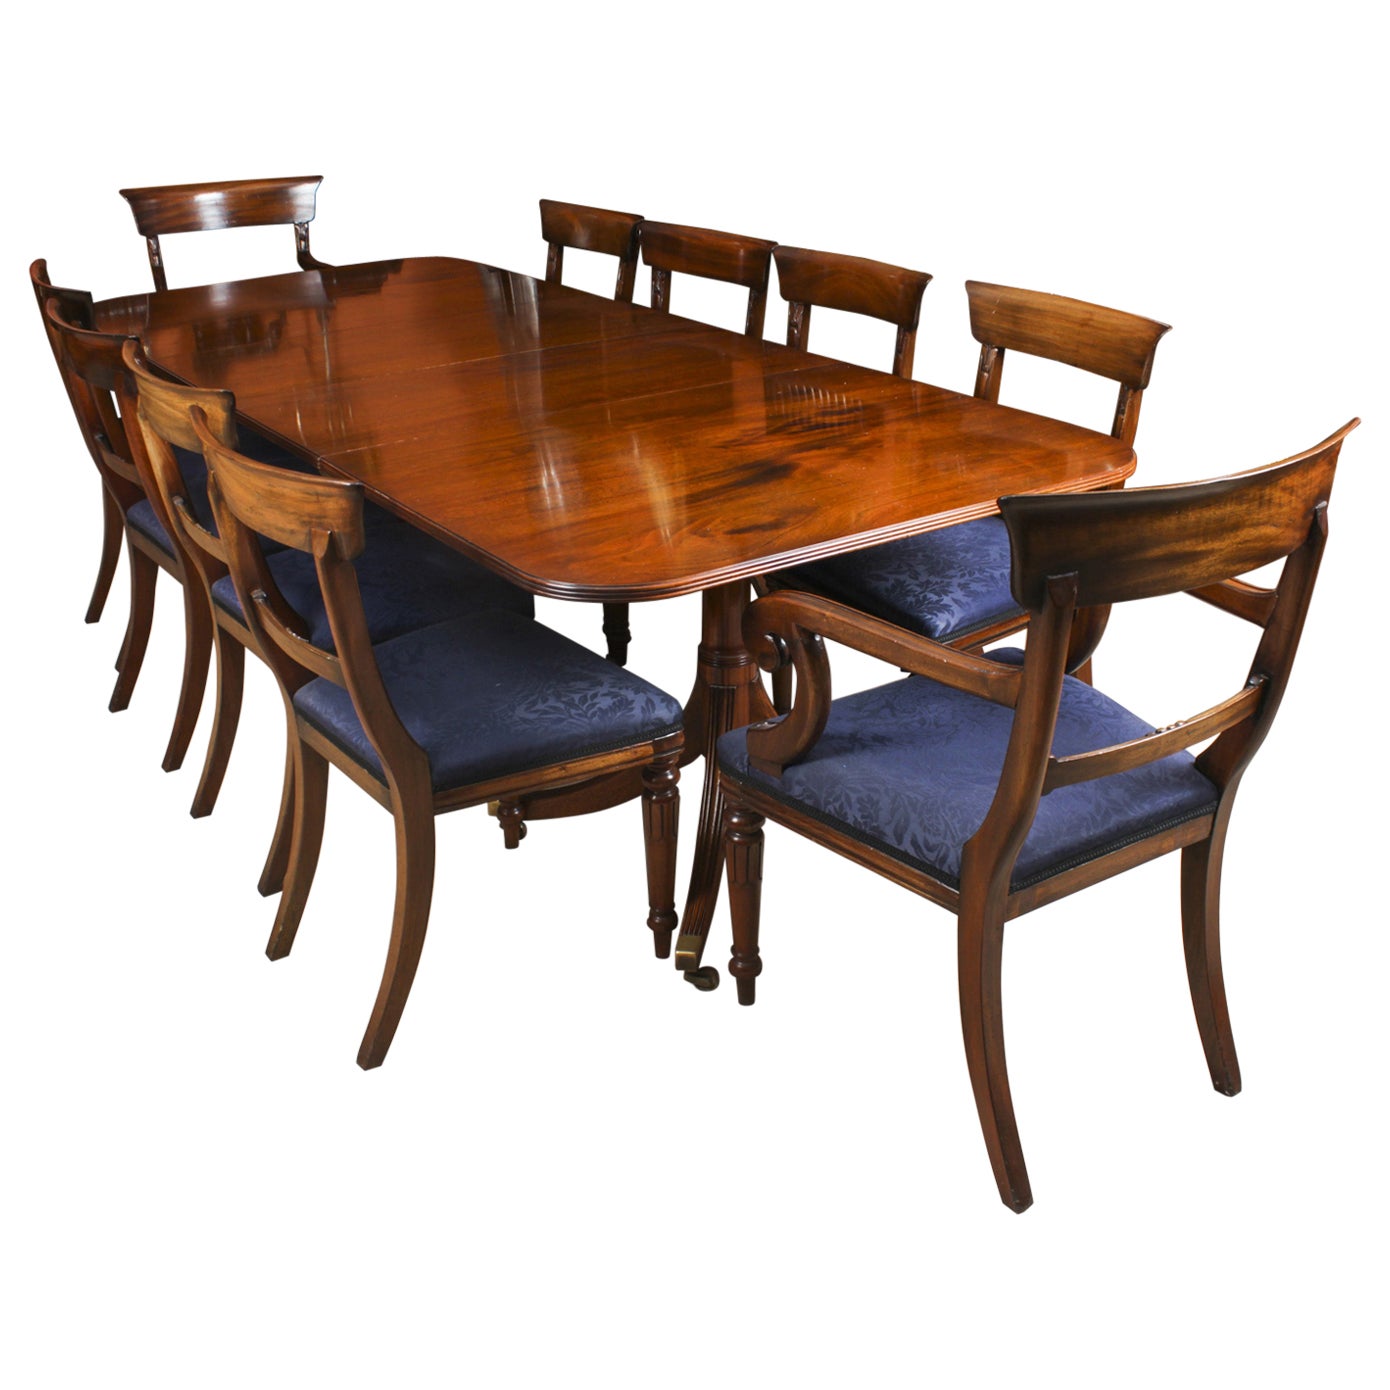 Vintage Twin Pillar Dining Table & 10 dining chairs by William Tillman 20th C